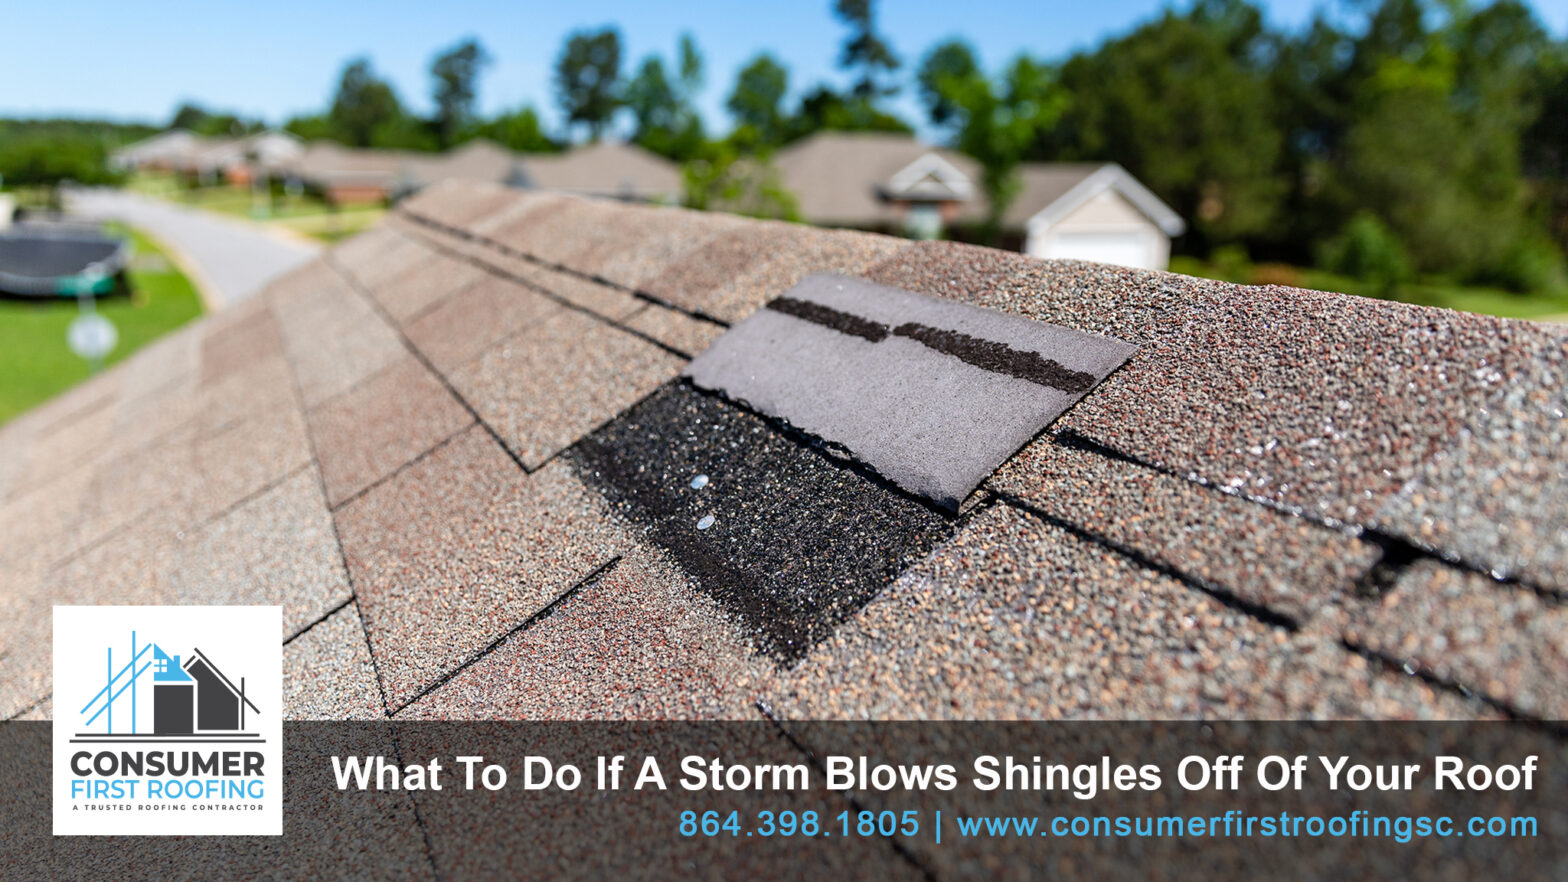 What To Do If A Storm Blows Shingles Off Of Your Roof